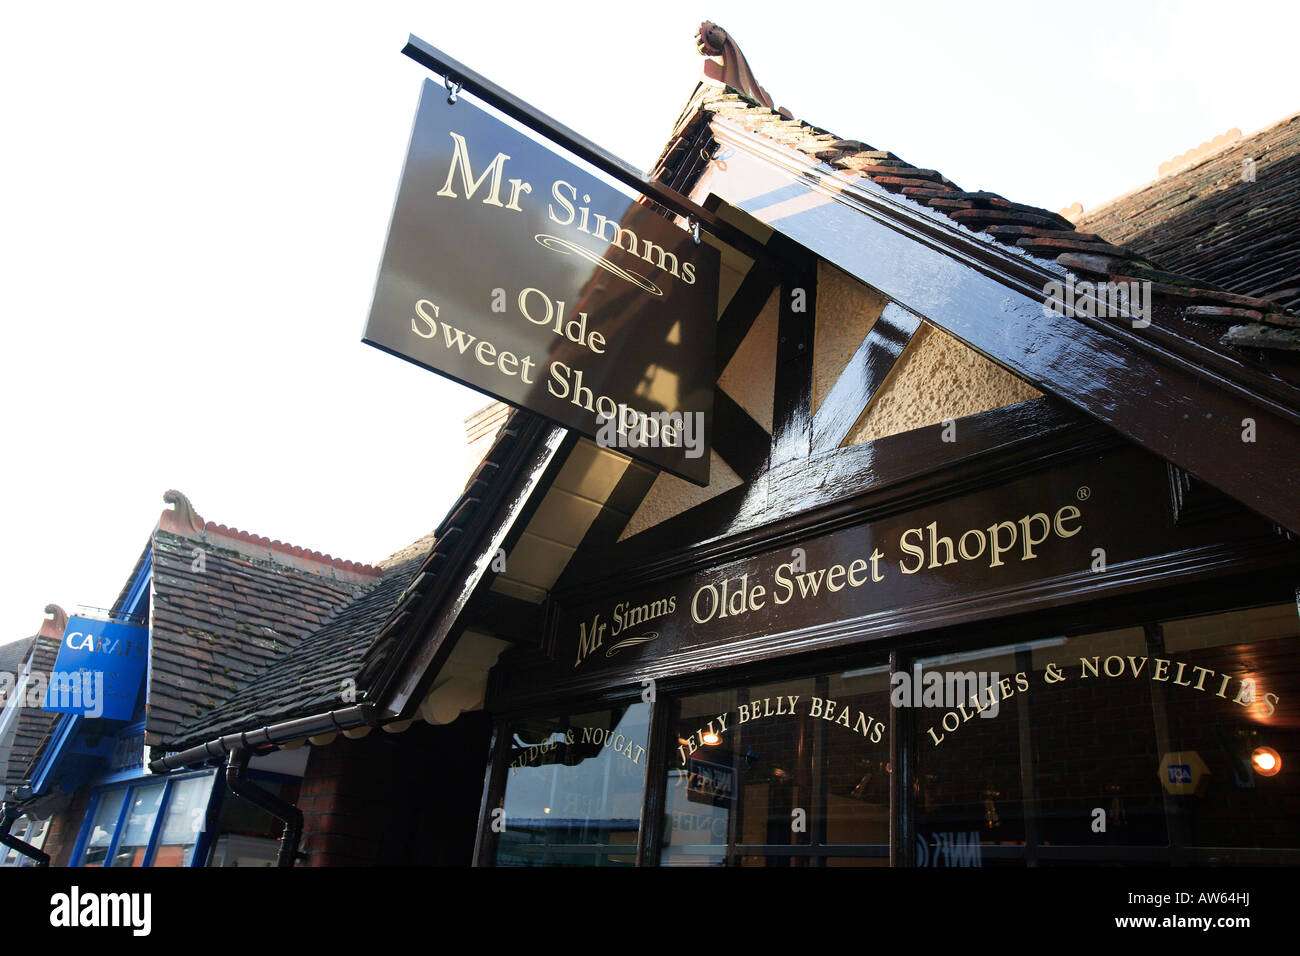 united kingdom essex colchester mr simms olde sweet shop Stock Photo